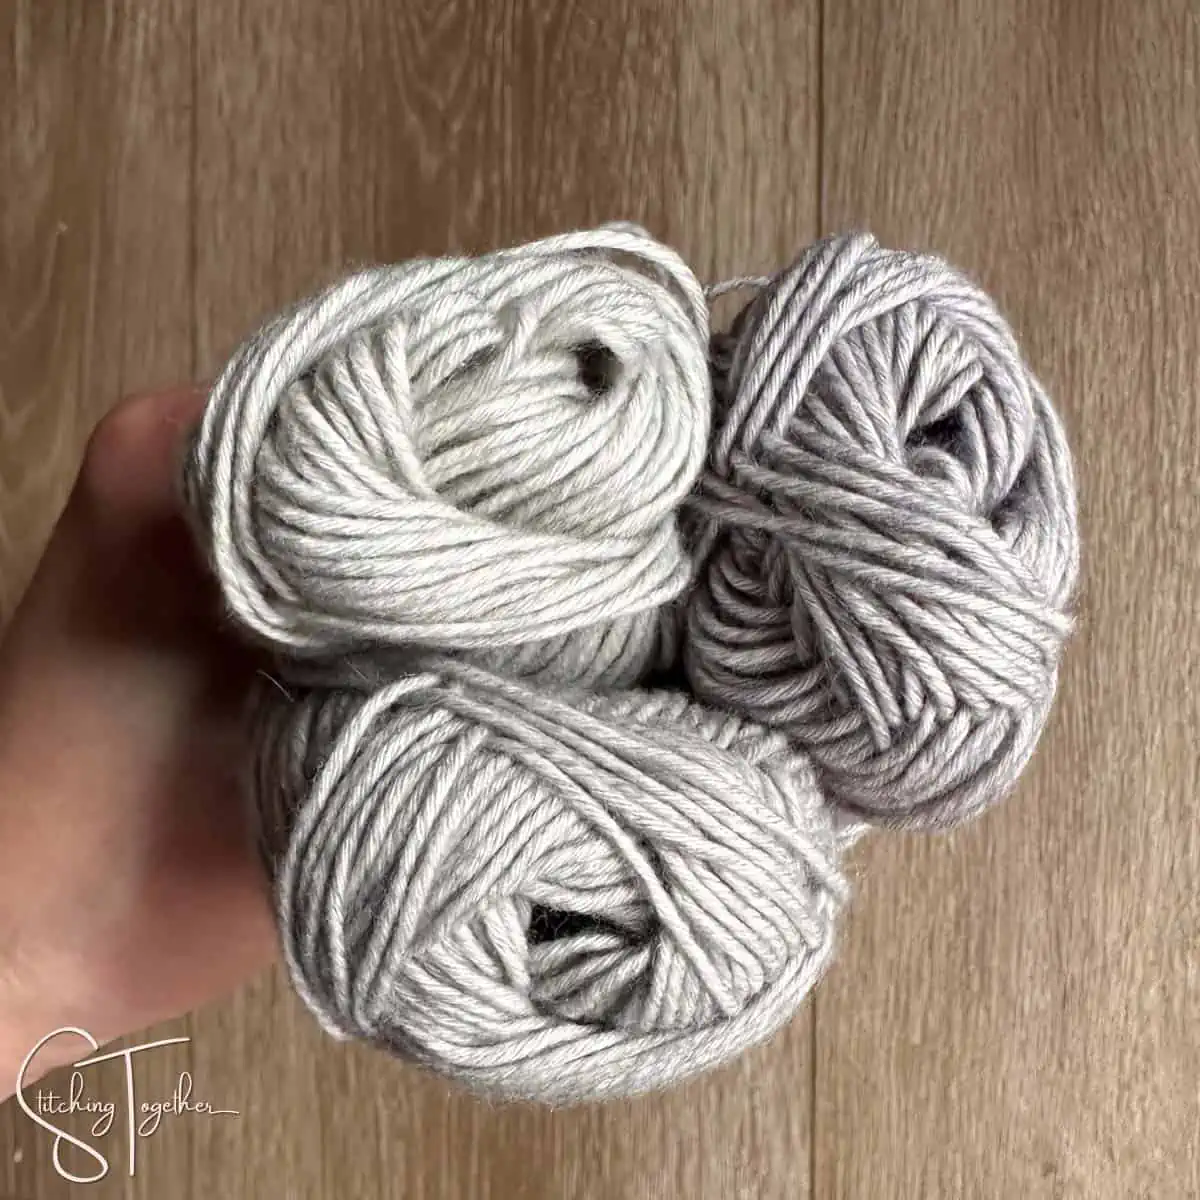 three slightly differently colored yarn being held